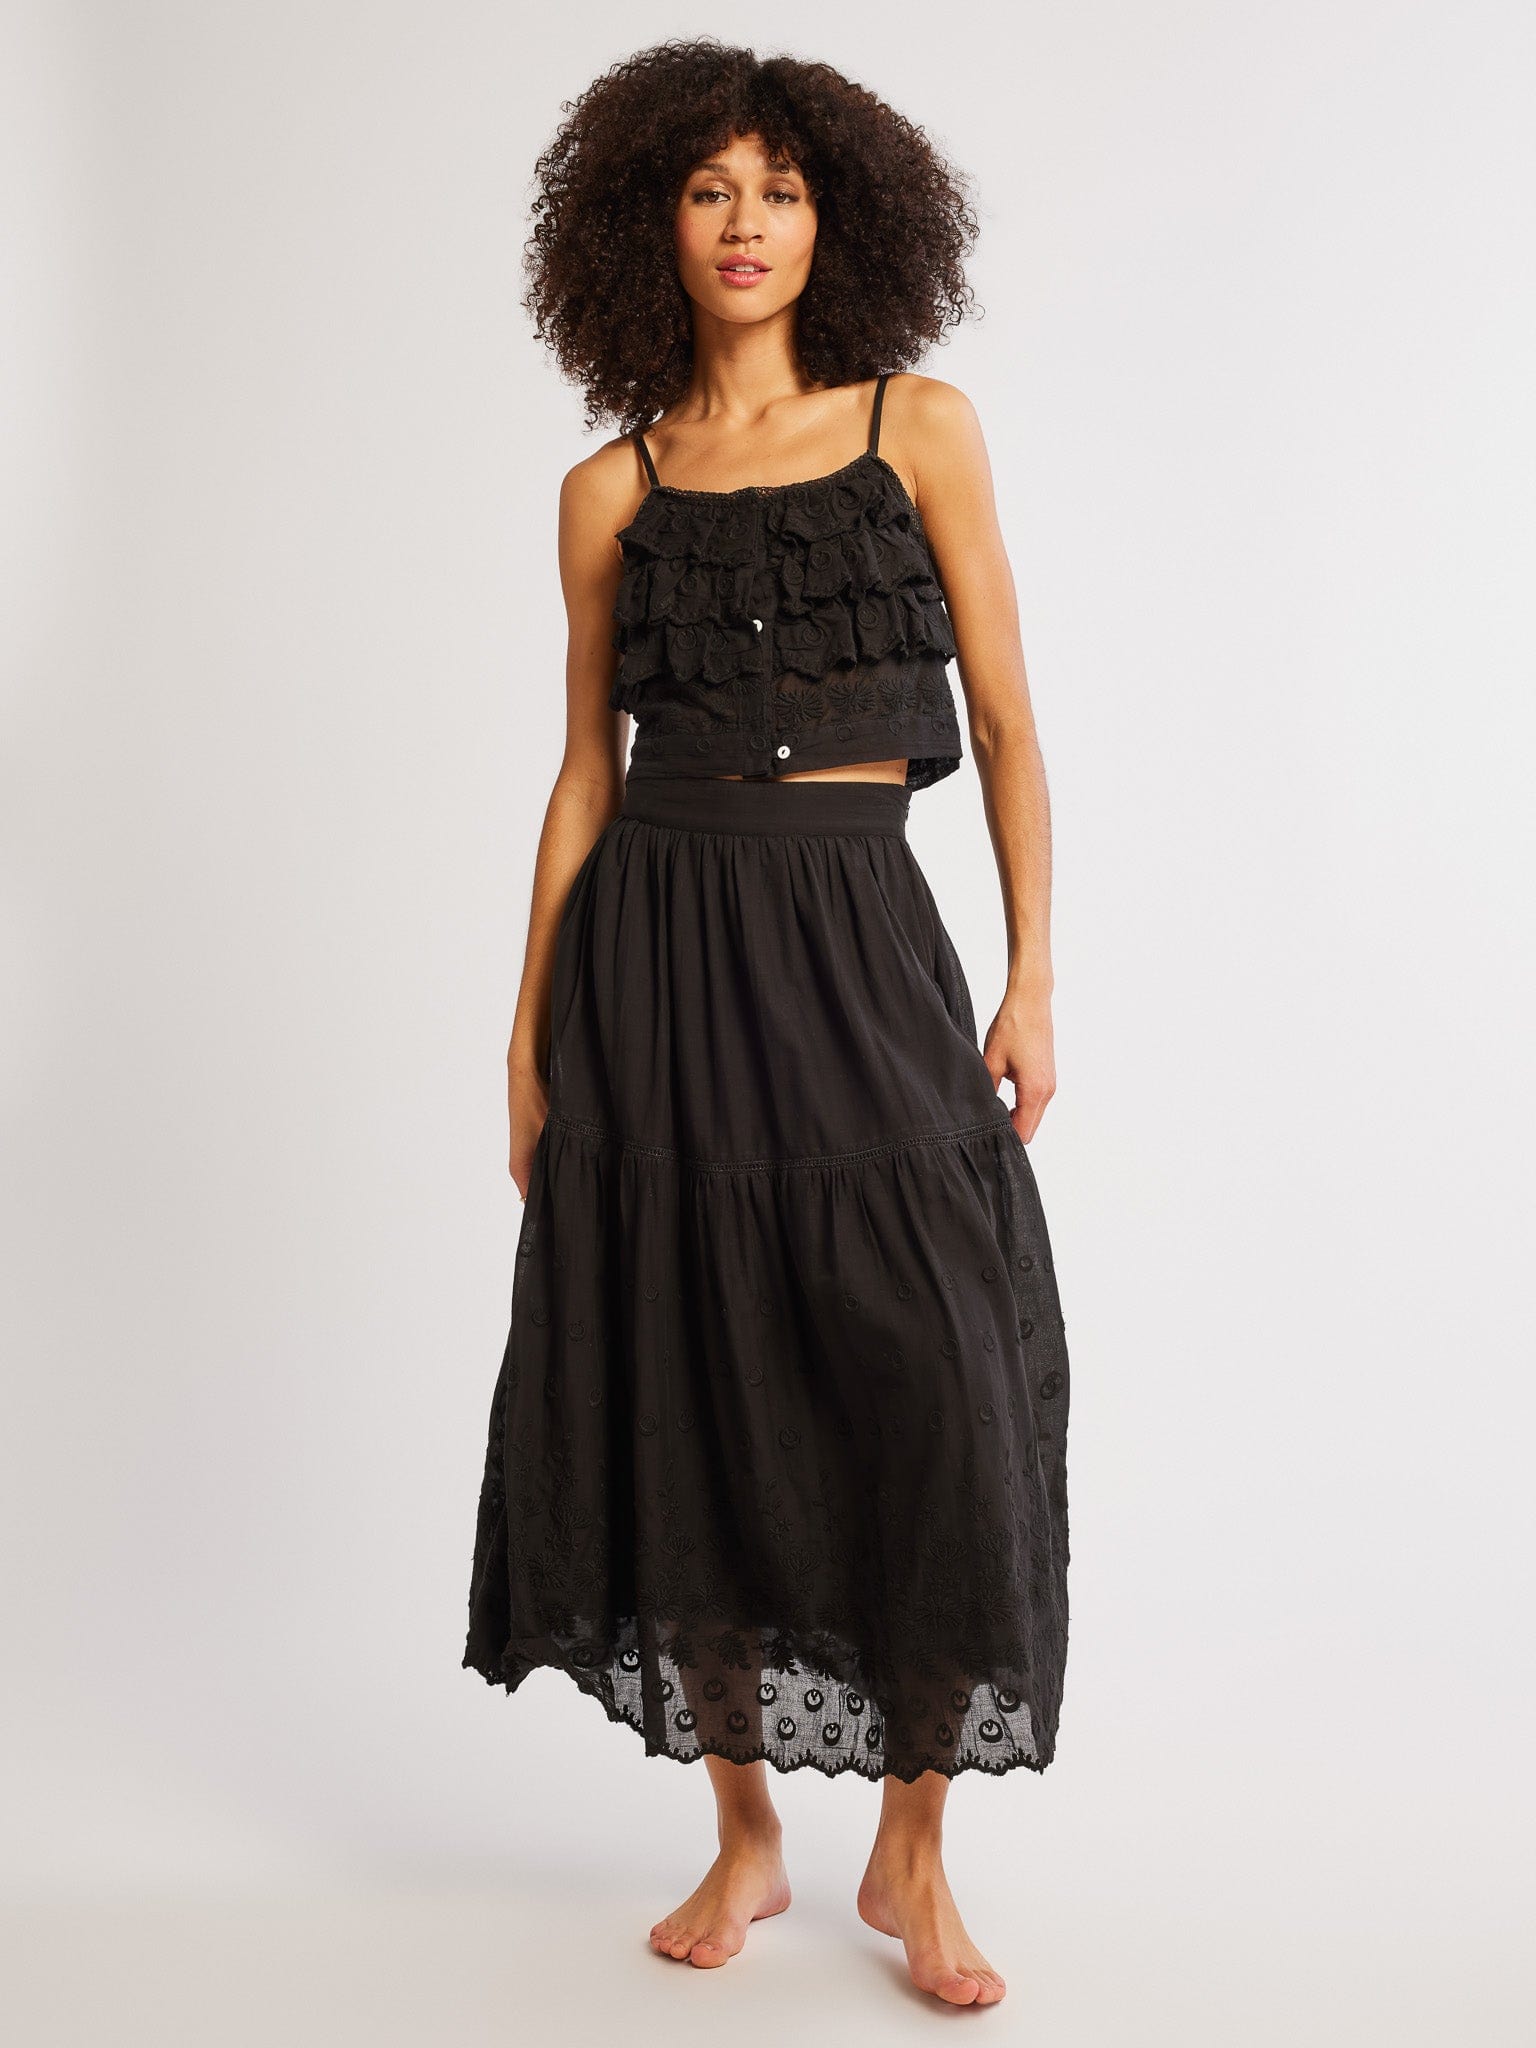 MILLE Clothing Betty Skirt in Black Petal Embroidery